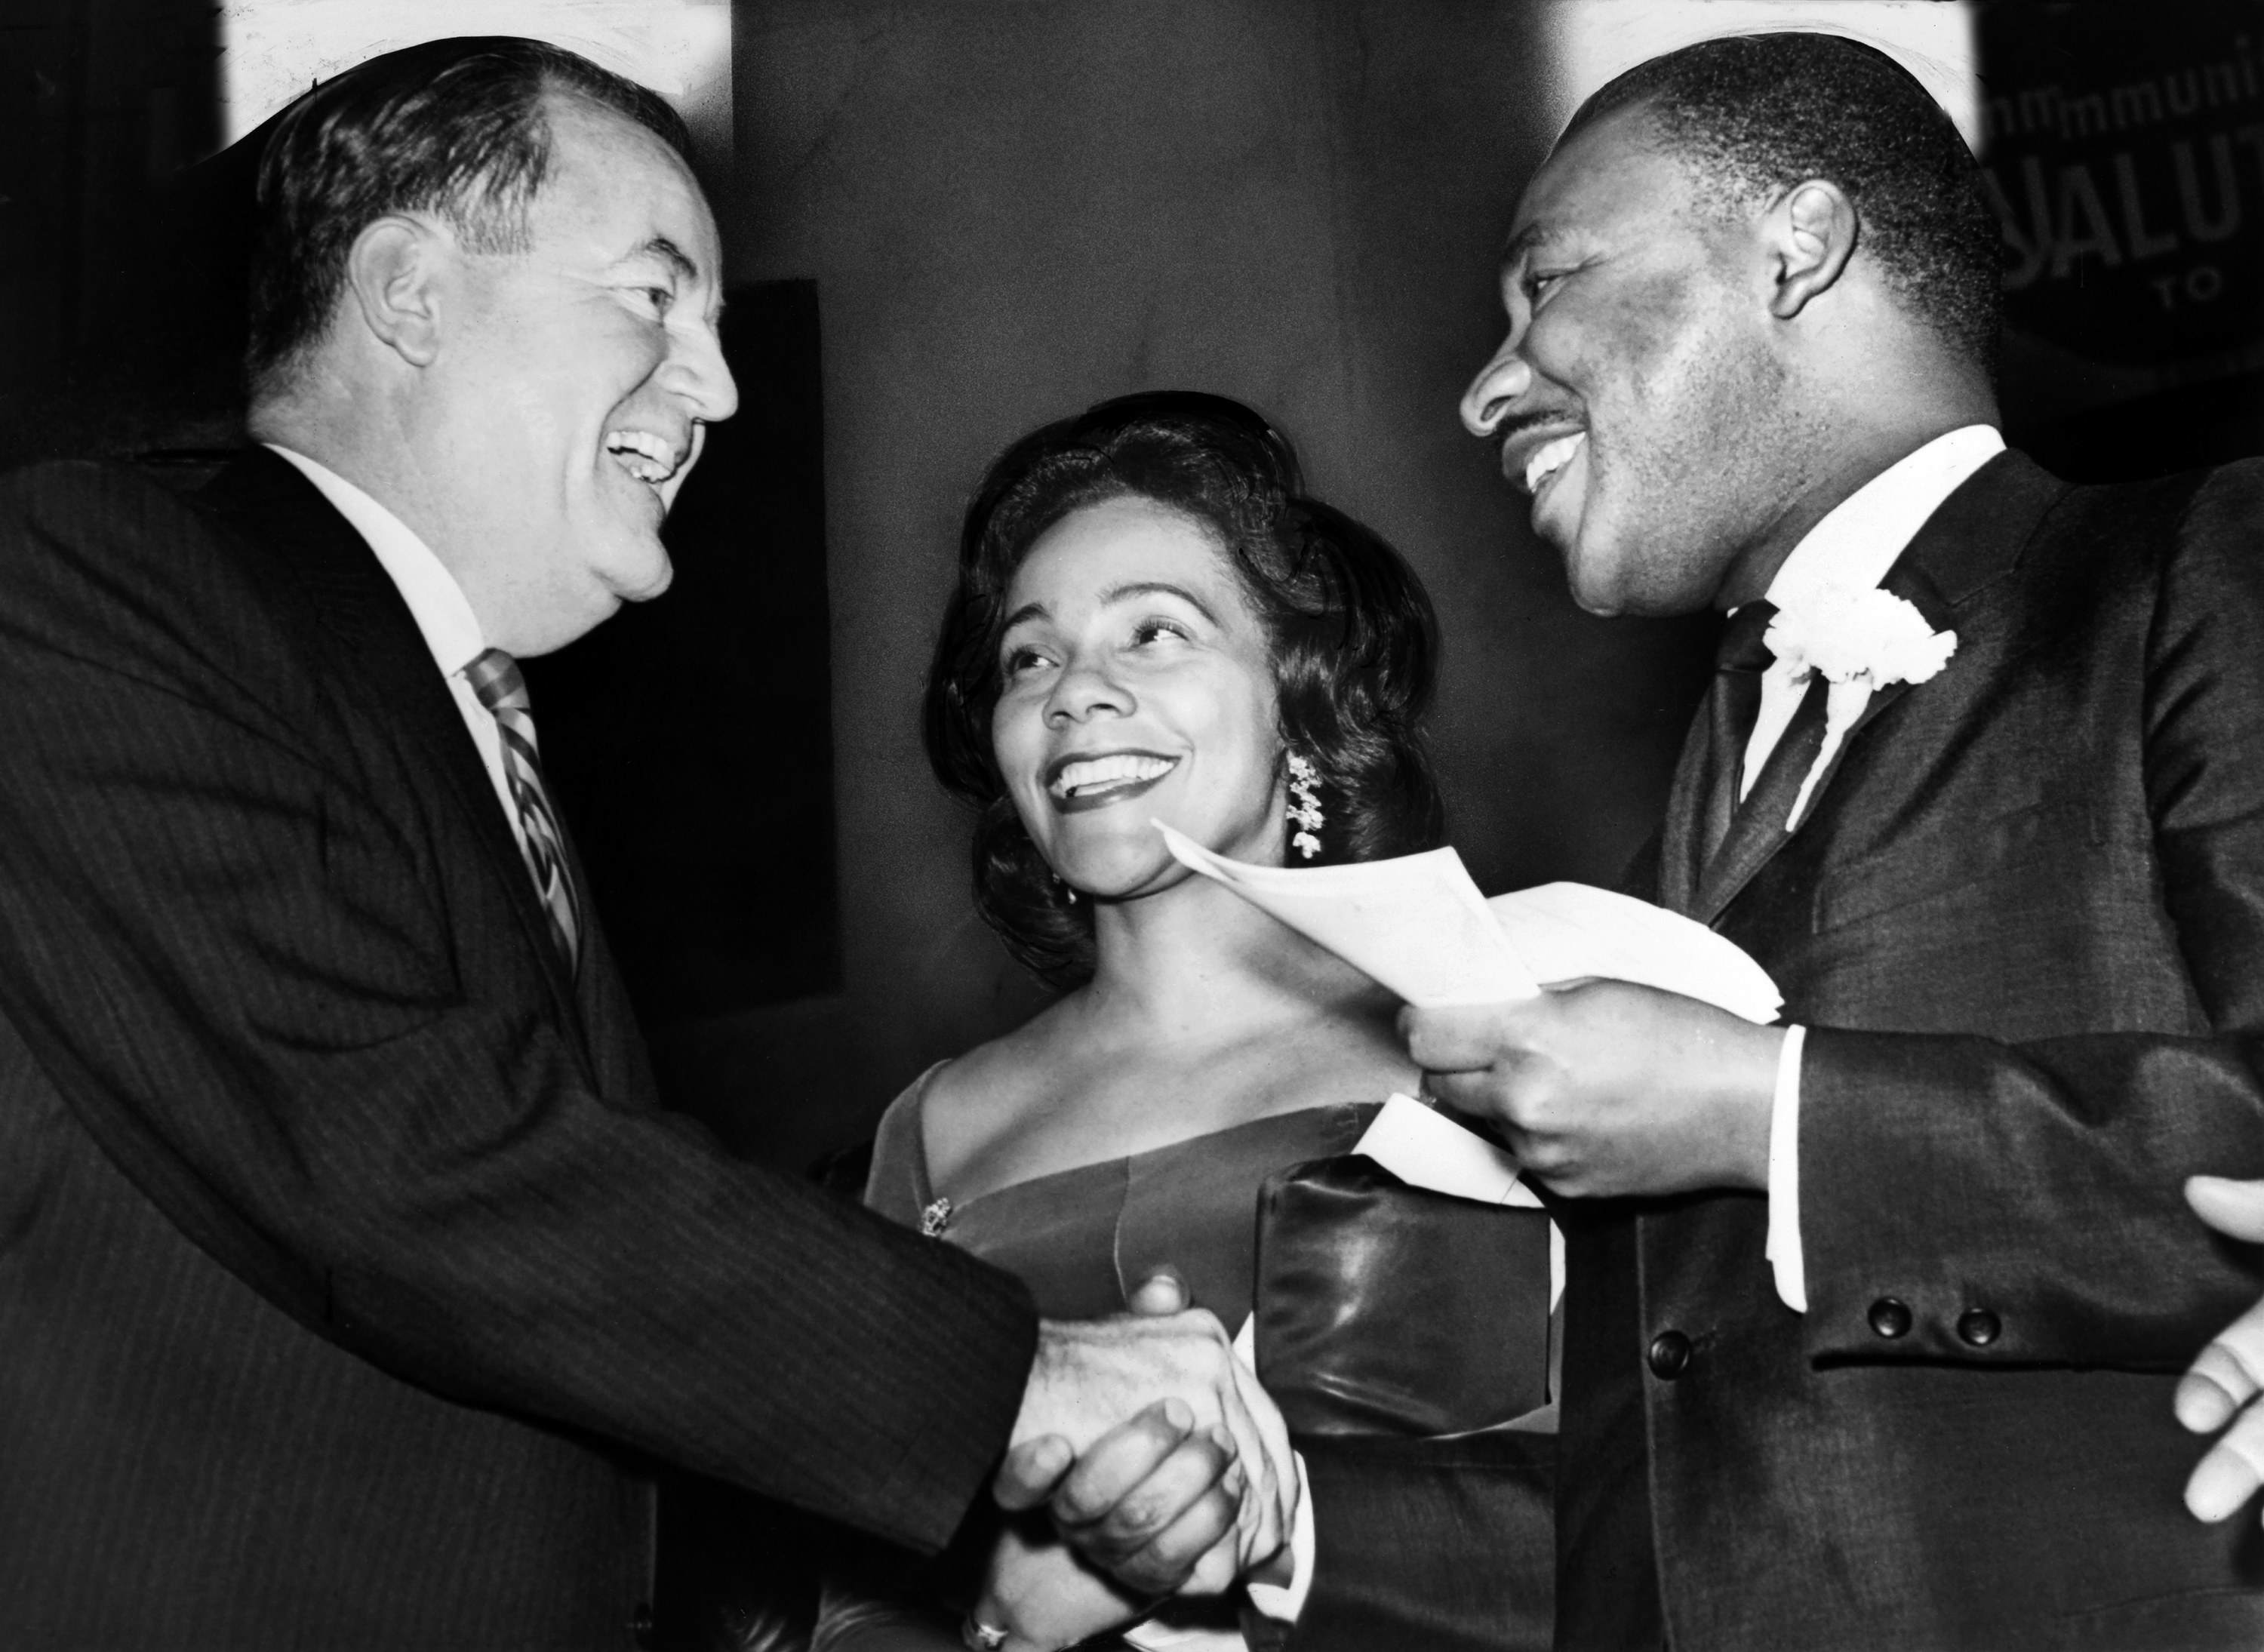 U.S. Vice President-elect Hubert Humphrey shaking hands with Dr. King, as Mrs. King looks on smiling